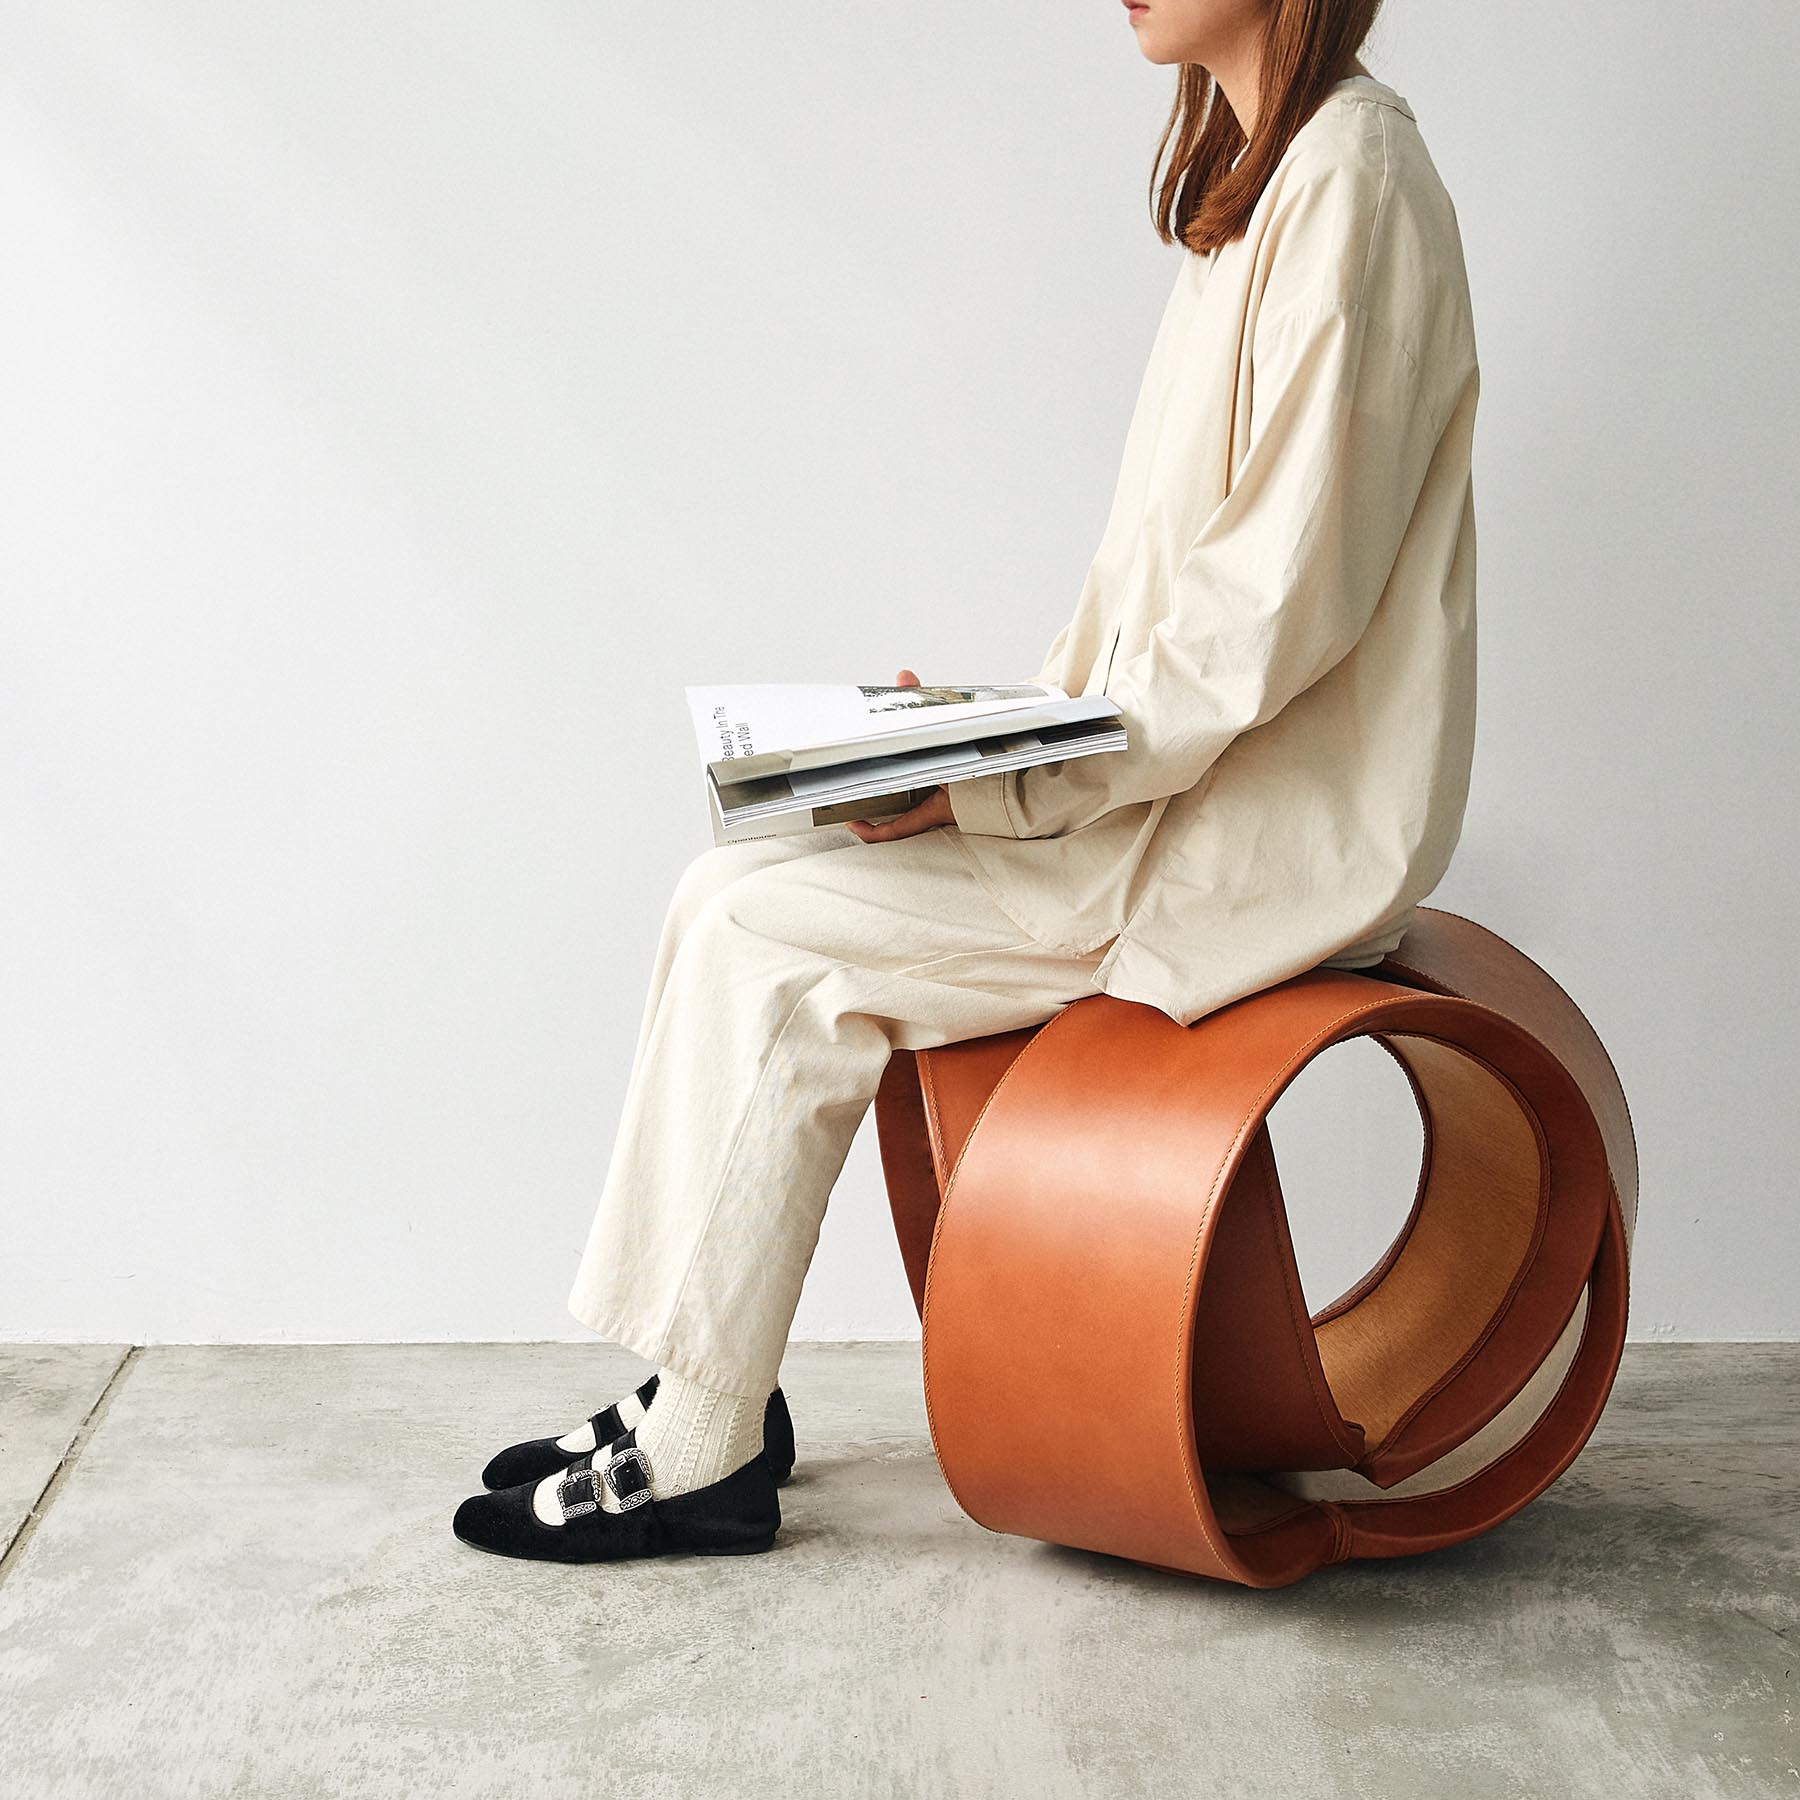 Inspired by circular geometry found in nature, this modern stool, made from wood and leather, transforms soft and solid materials into comfortable seat.